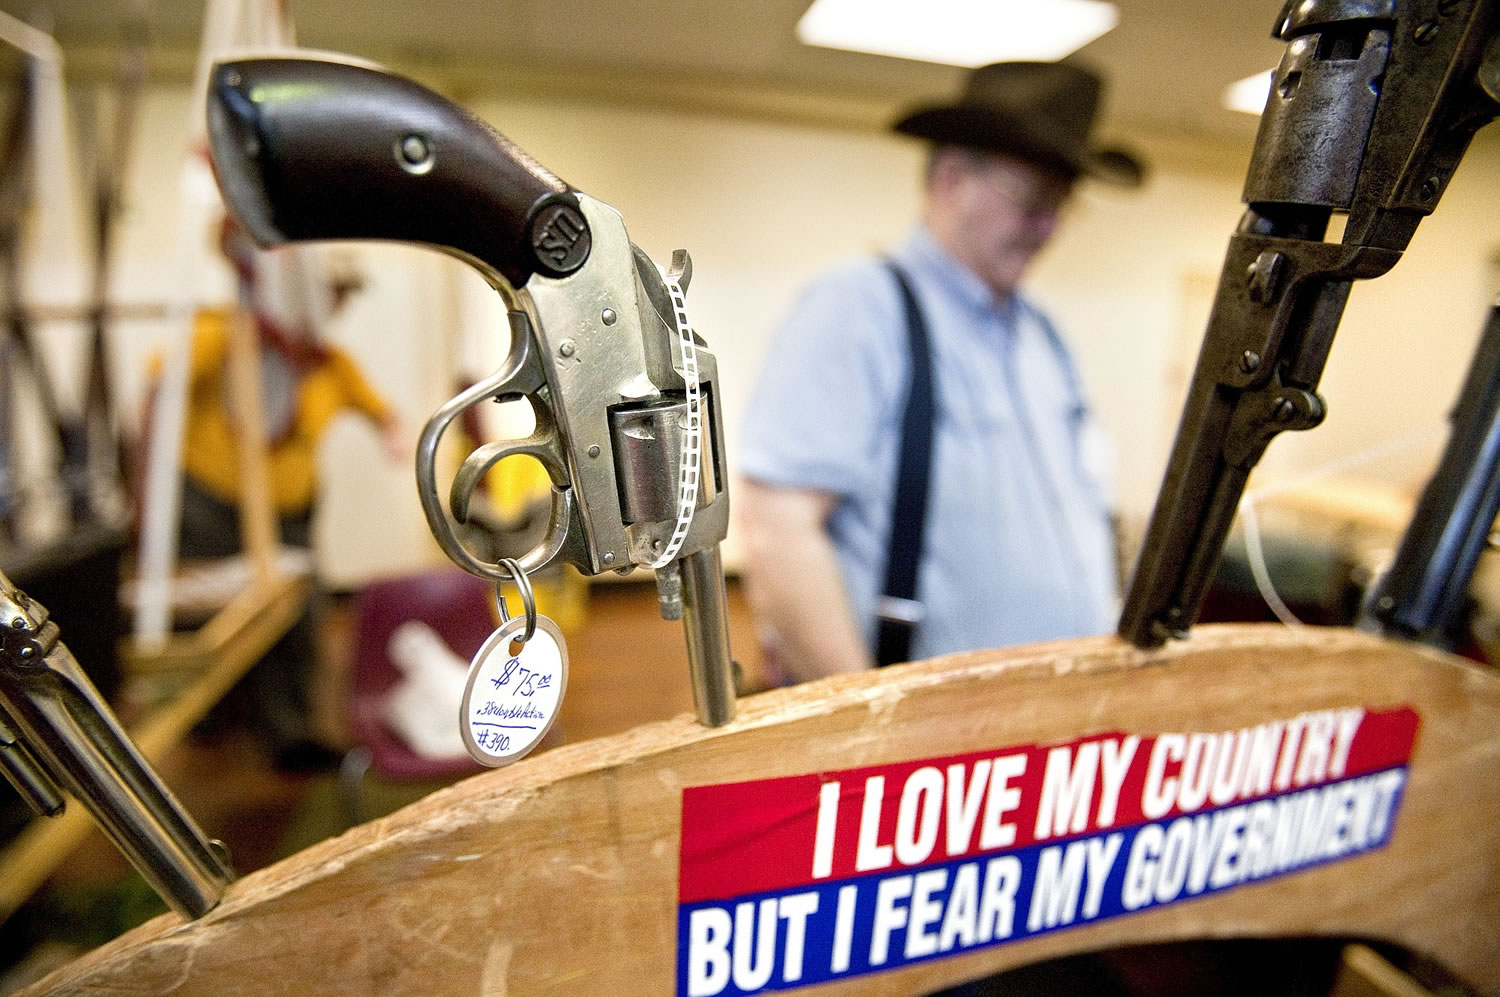 A pistol is displayed for sale by gun collector Steve Frost on Feb. 16, 2013, during the Sports Connection Gun Show in Yakima. Washington voters will decide in November if background checks for gun sales should be expanded, or prohibited from exceeding federal requirements.